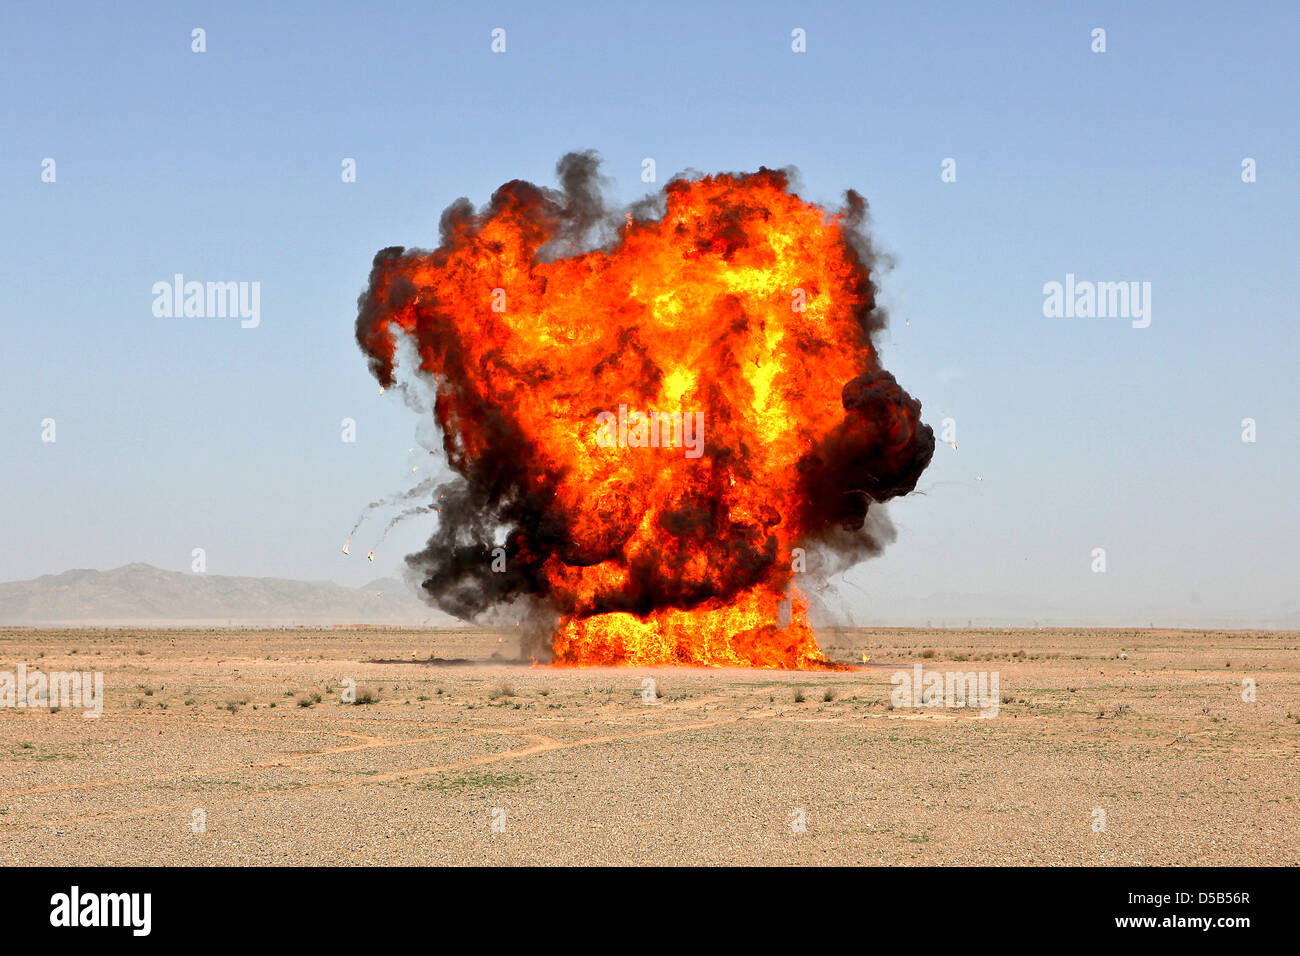 US Marines with 1st Explosive Ordnance Disposal Company conduct a controlled explosion to dispose of dangerous ammunition March 17, 2013 in Helmand province, Afghanistan. Stock Photo